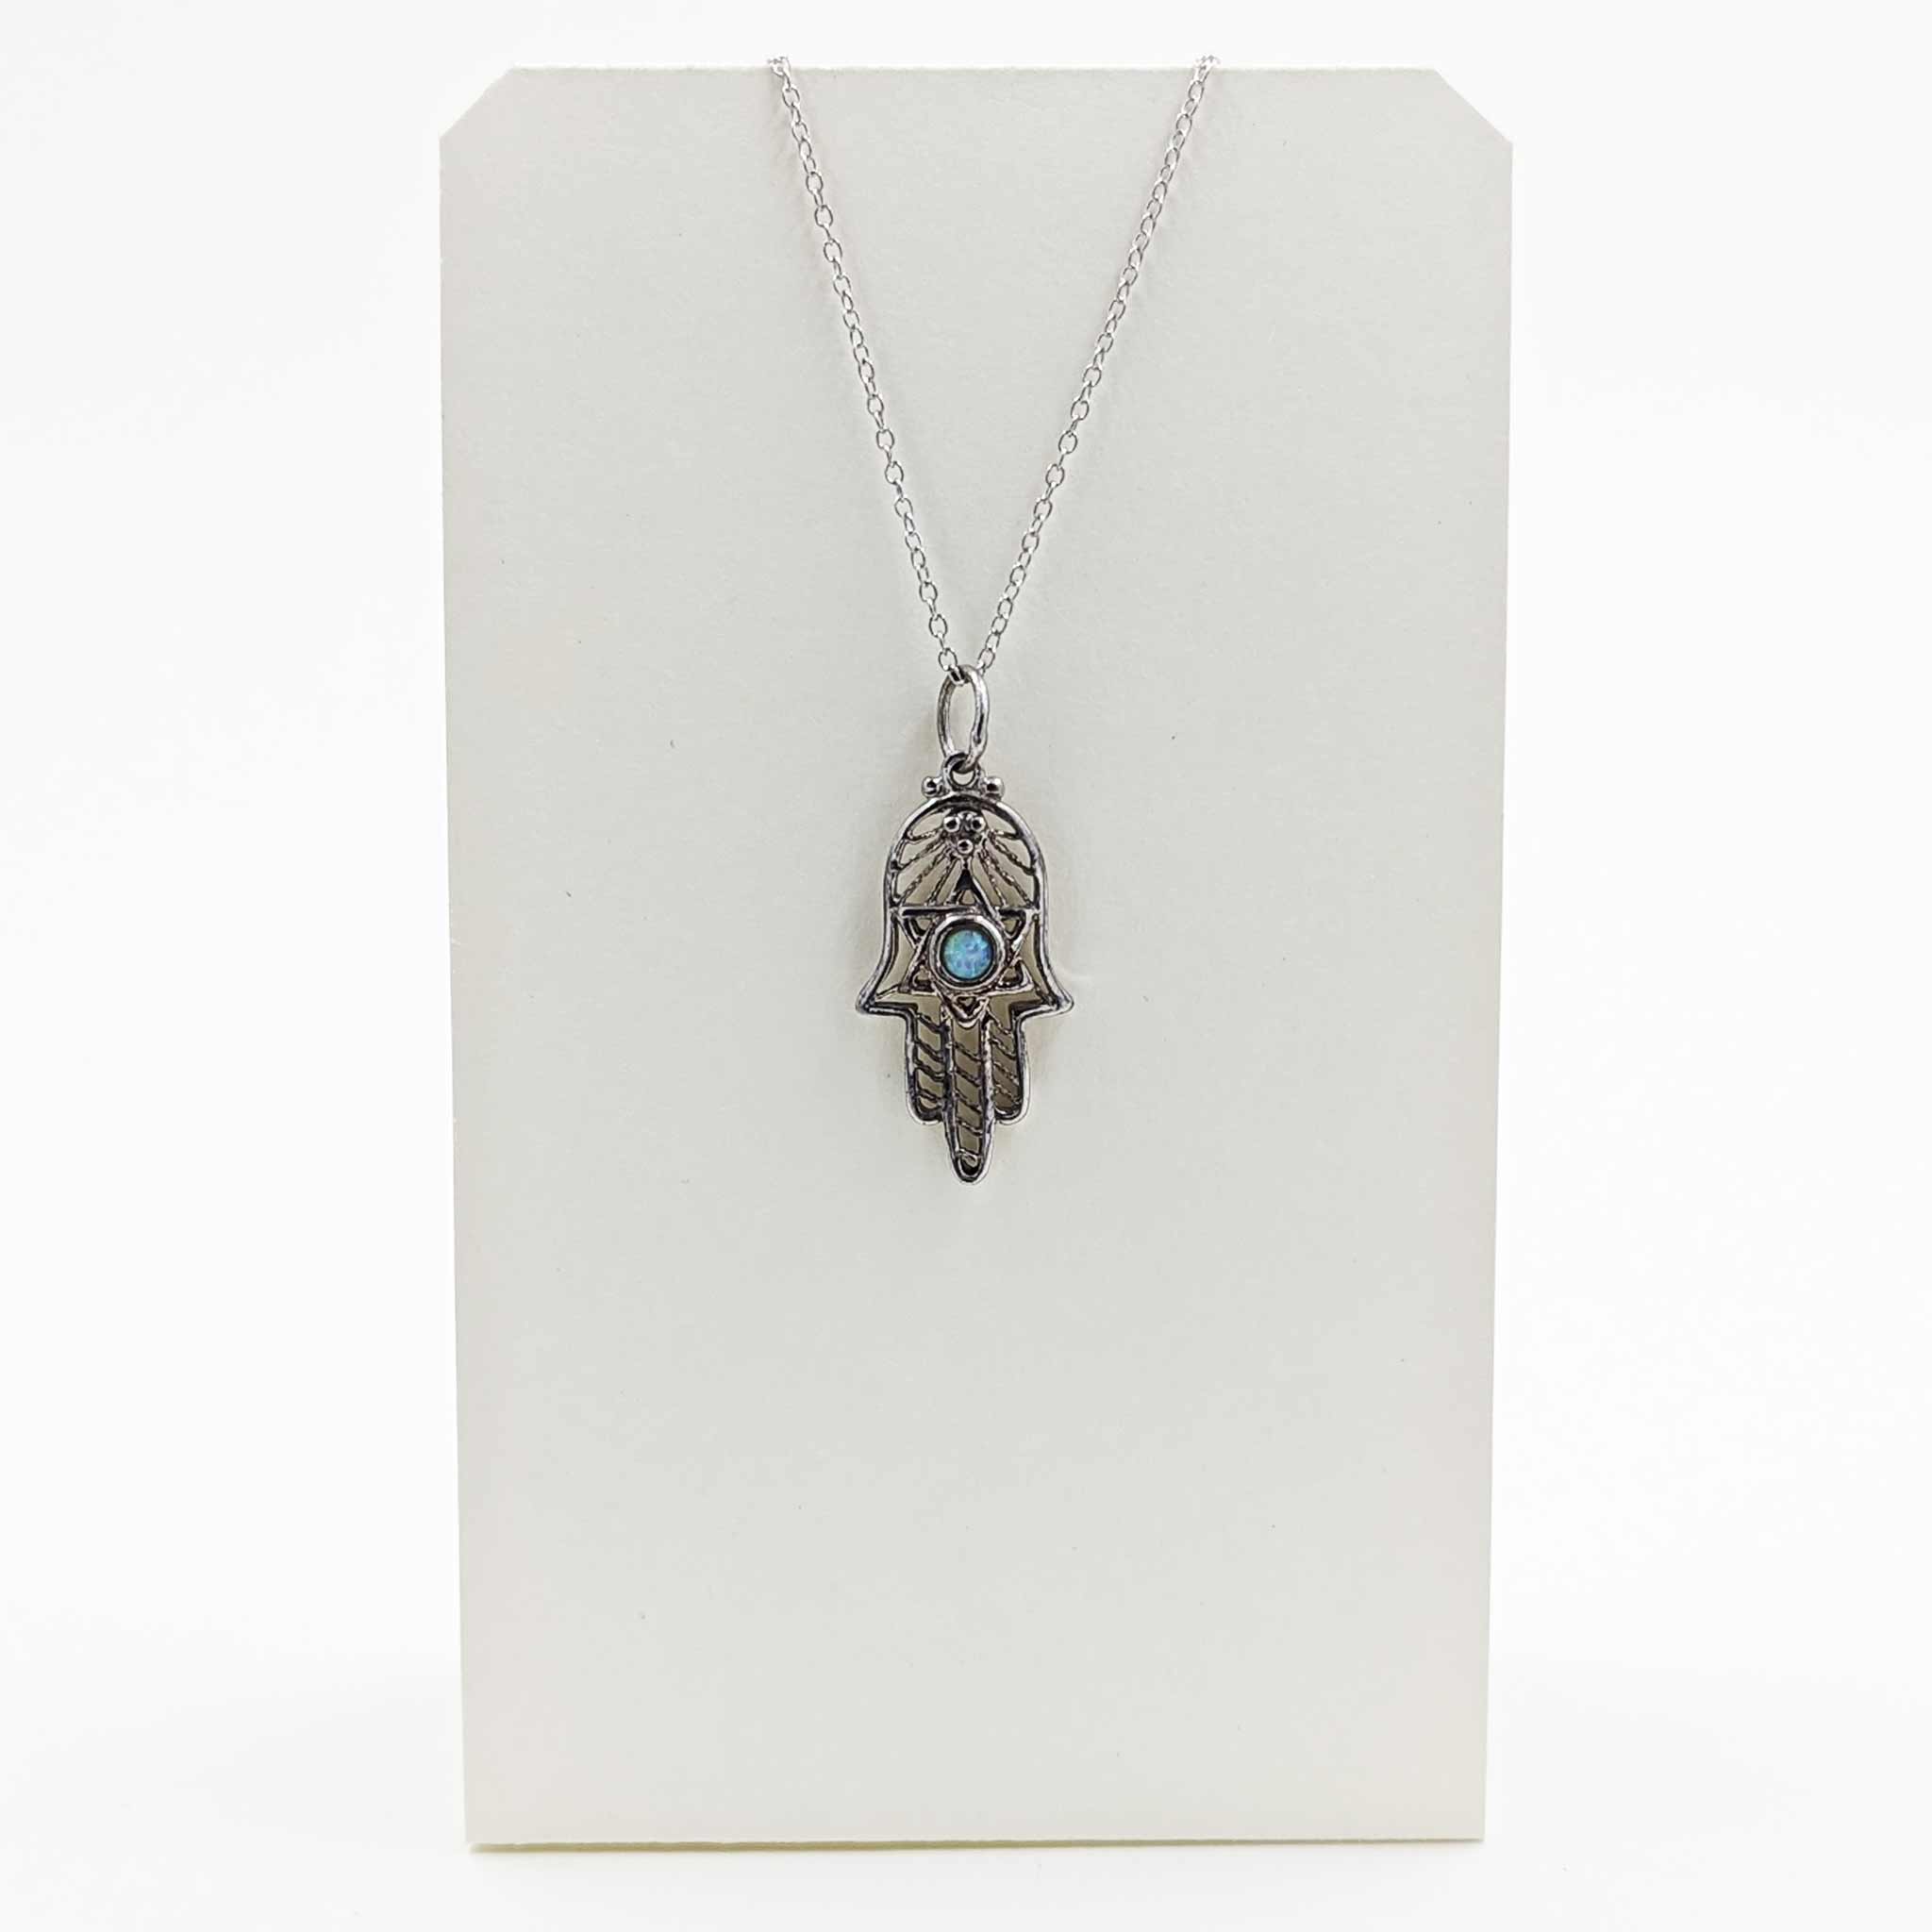 Necklace-Filigree Hamsa w/Magen David and Turquoise Stone-Sterling Silver